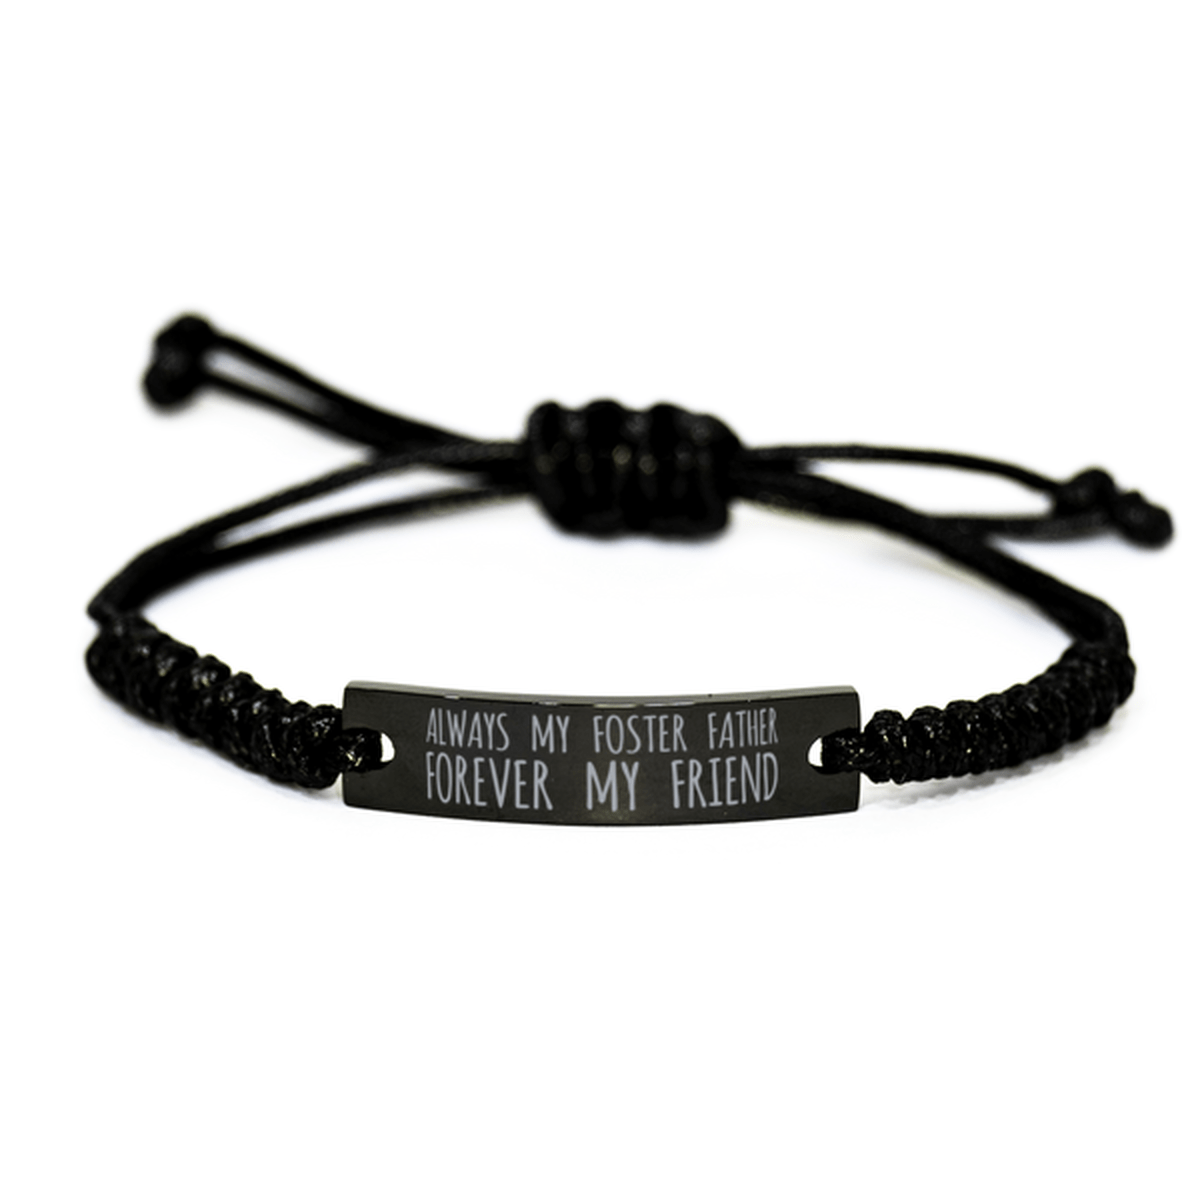 Inspirational Foster Father Black Rope Bracelet, Always My Foster Father Forever My Friend, Best Birthday Gifts For Family